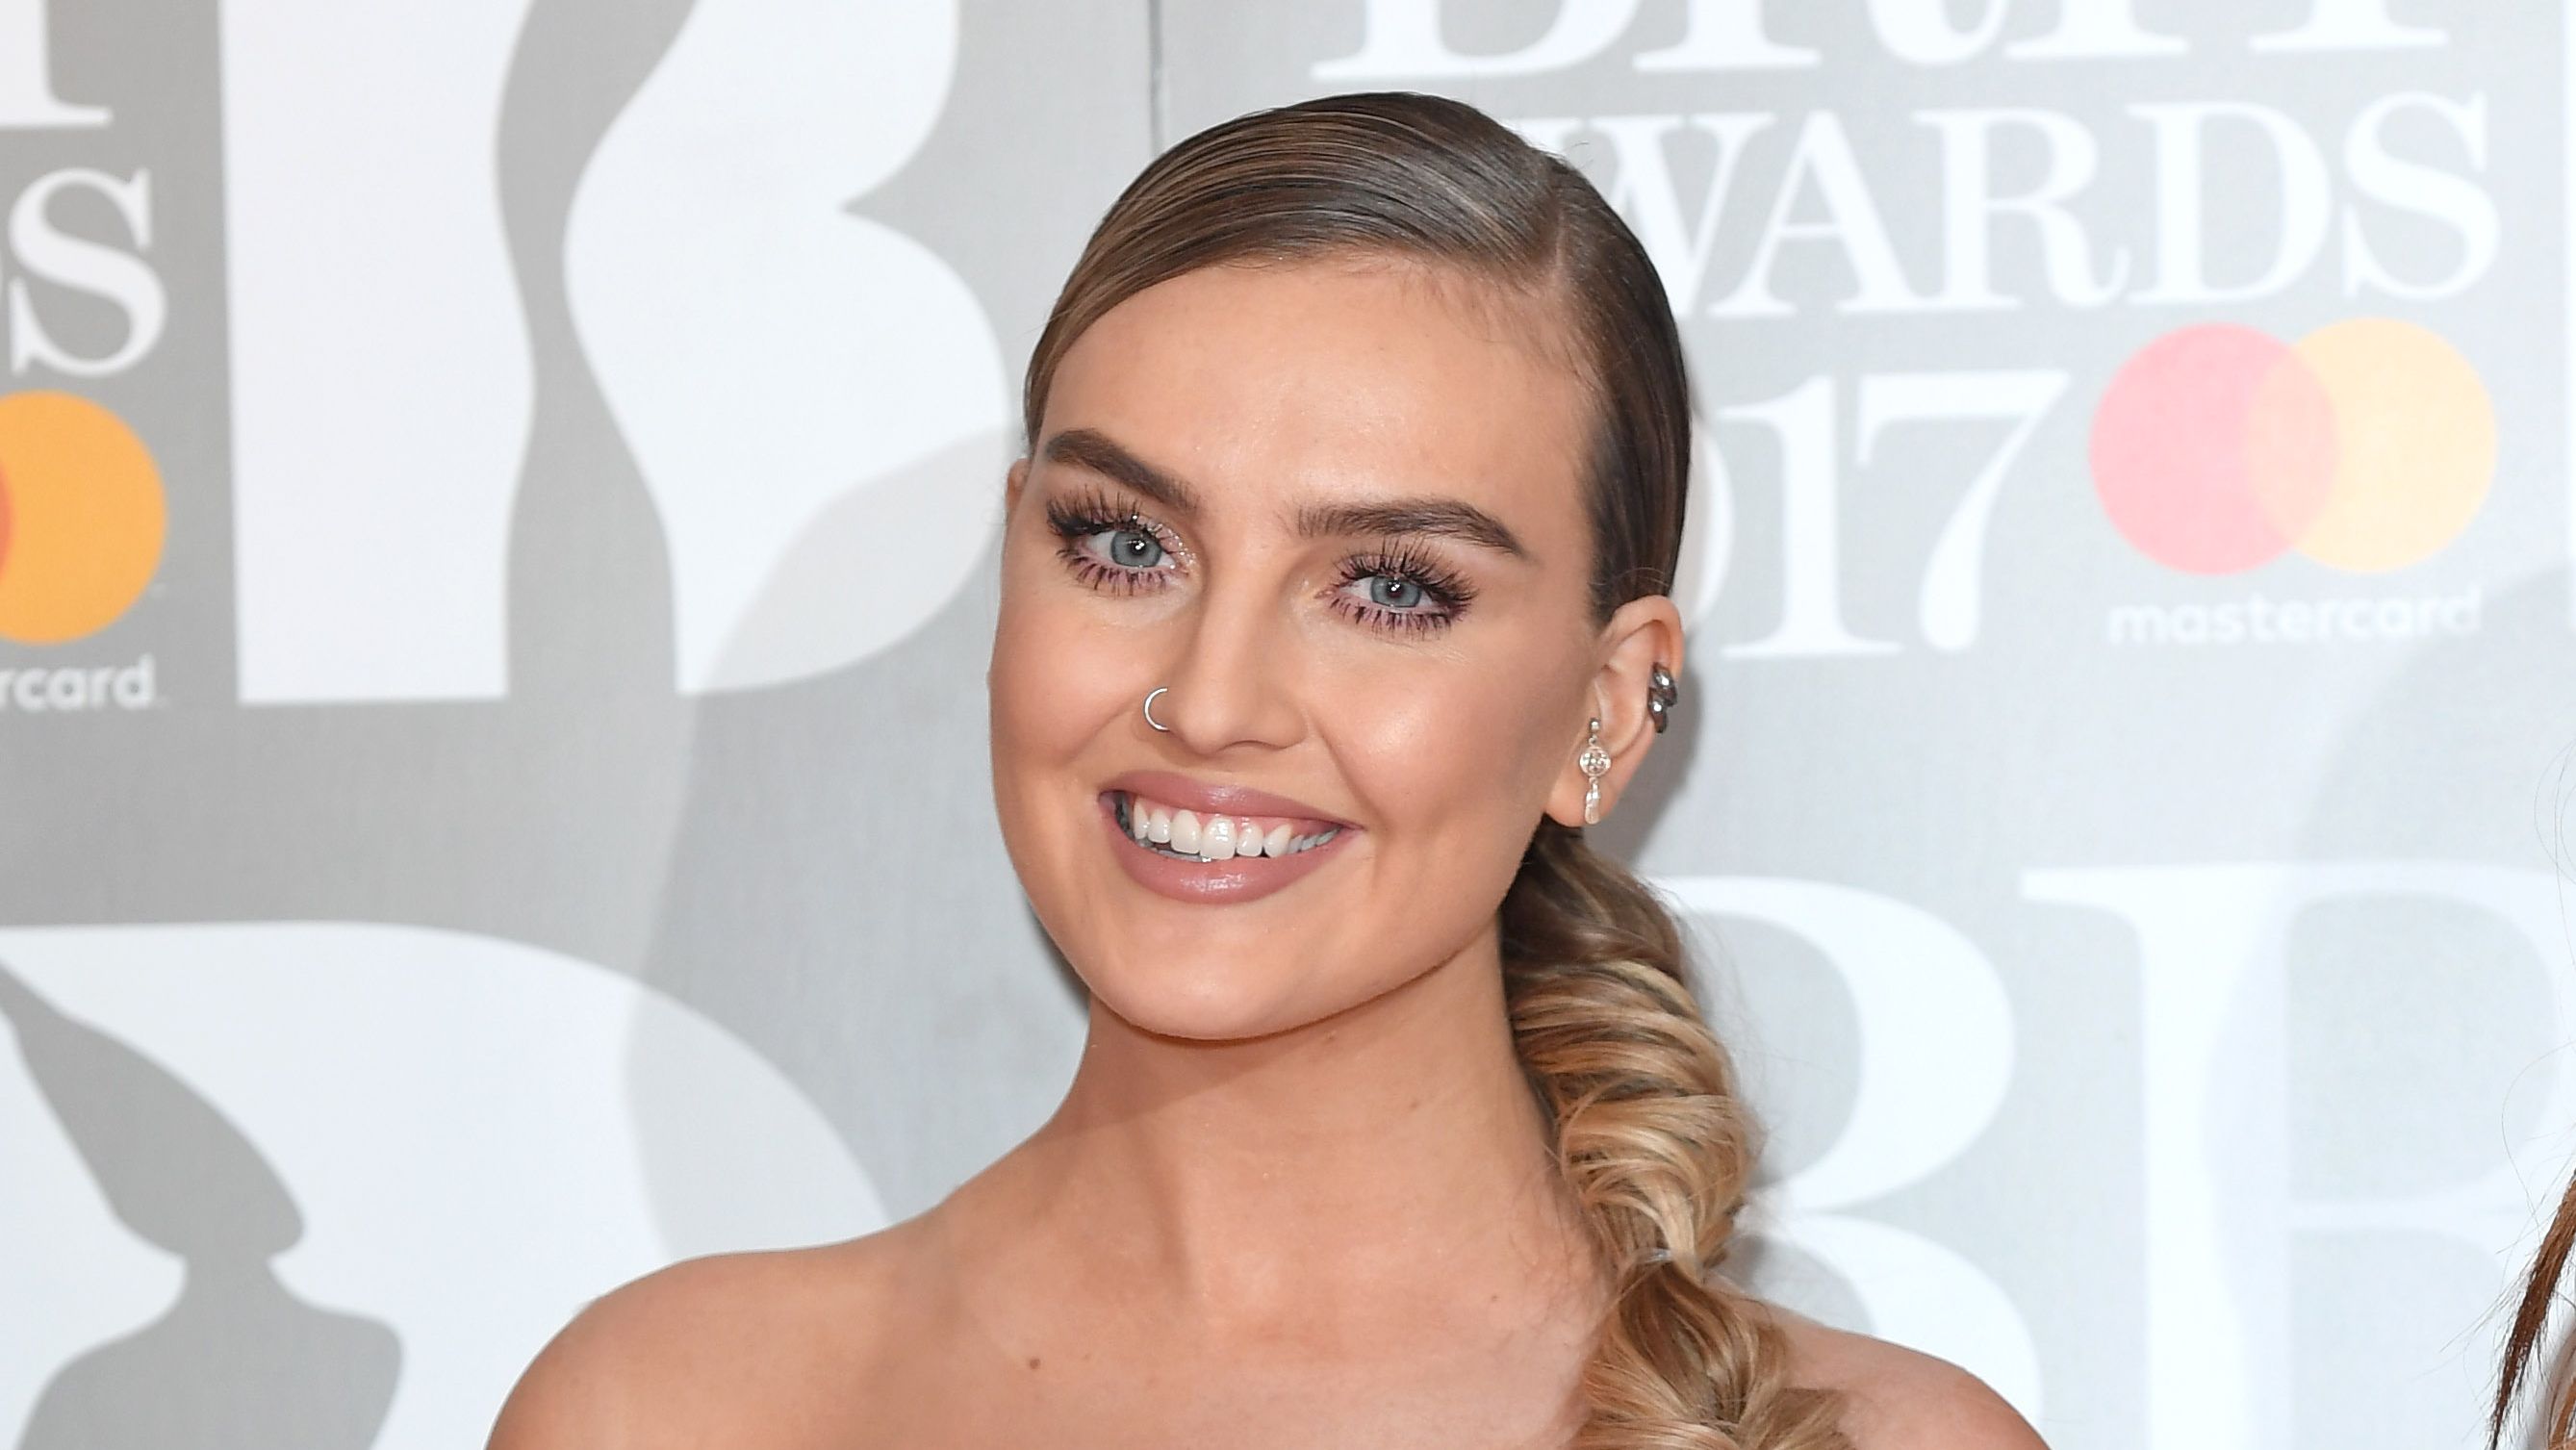 Little Mixs Perrie Edwards Shows Off Her Natural Beauty In Make Up Free Selfie Celebrity 